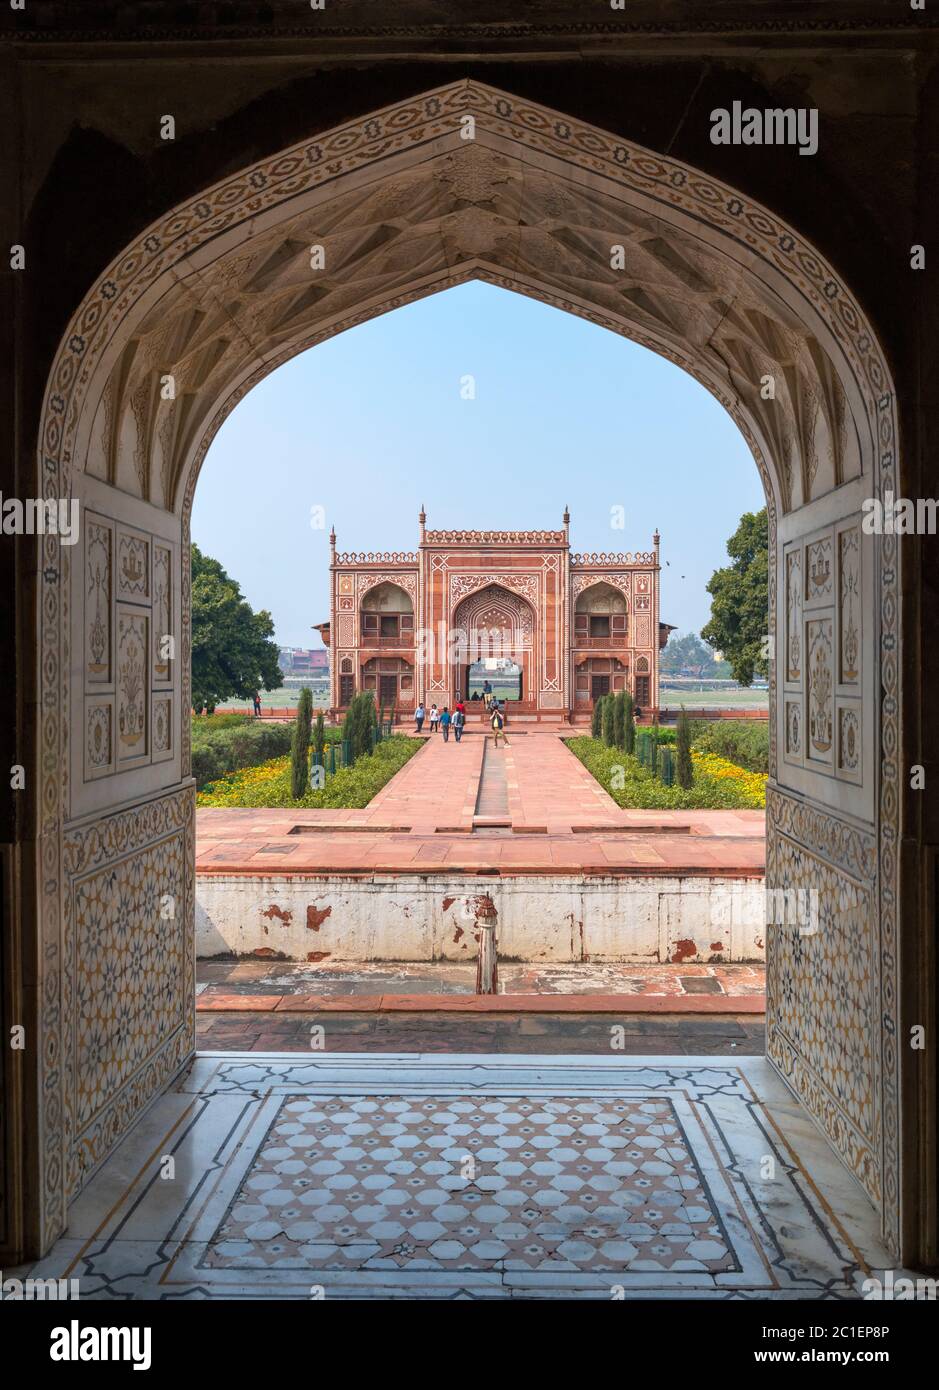 View from the Tomb of Itmad-ud-Daulah (I'timād-ud-Daulah), also known as 'Baby Taj', a Mughal mausoleum in the city of Agra, Uttar Pradesh, India Stock Photo